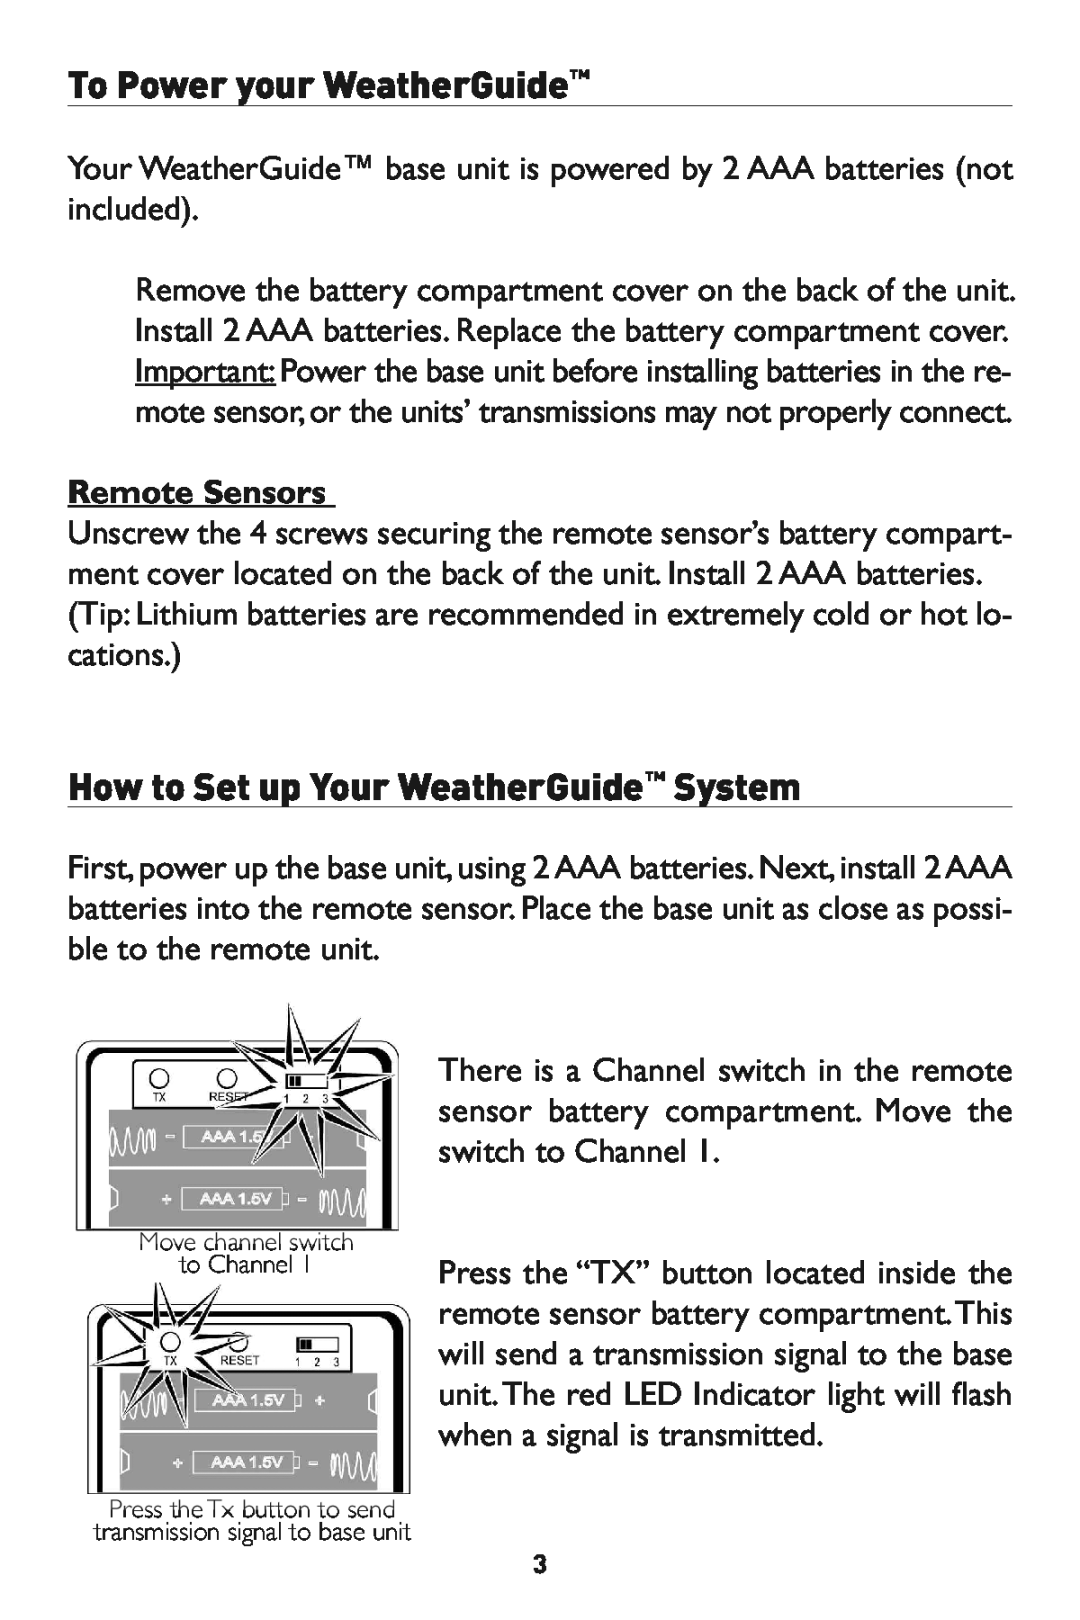 Taylor 1525 instruction manual How to Set up Your WeatherGuide System, Remote S nsors 